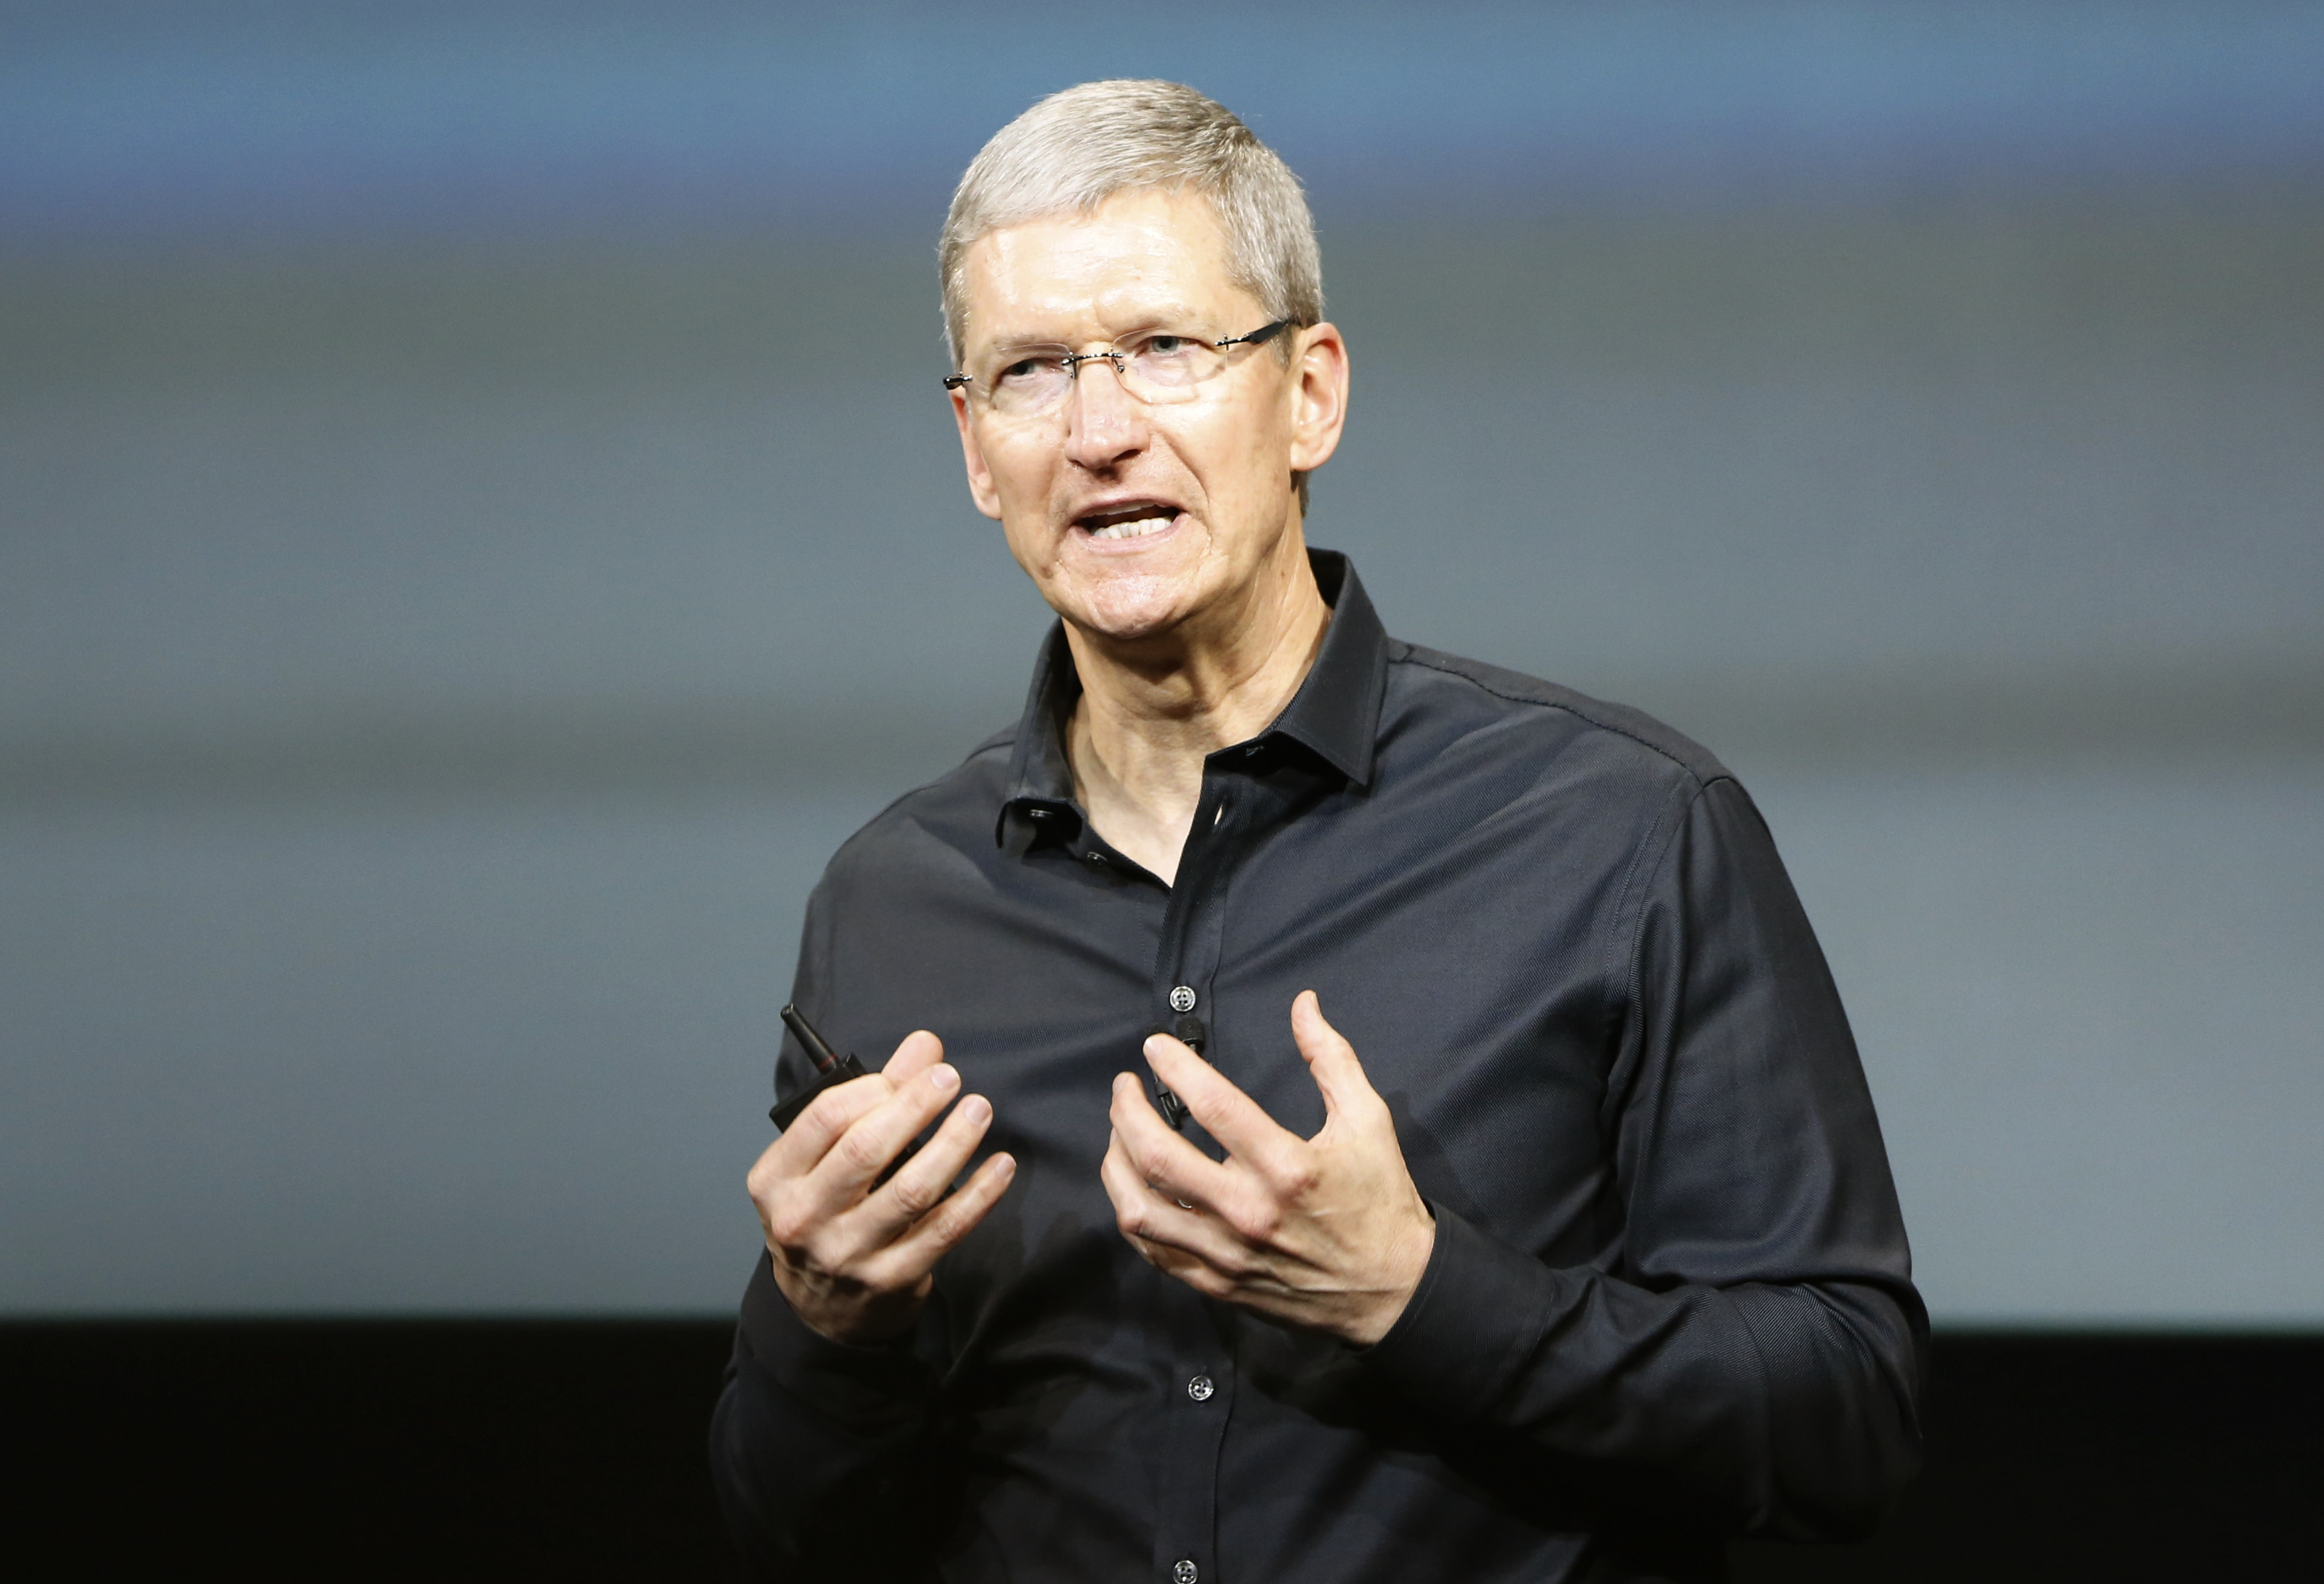 Apple Inc CEO Tim Cook speaks from the stage during Apple Inc's media event in Cupertino